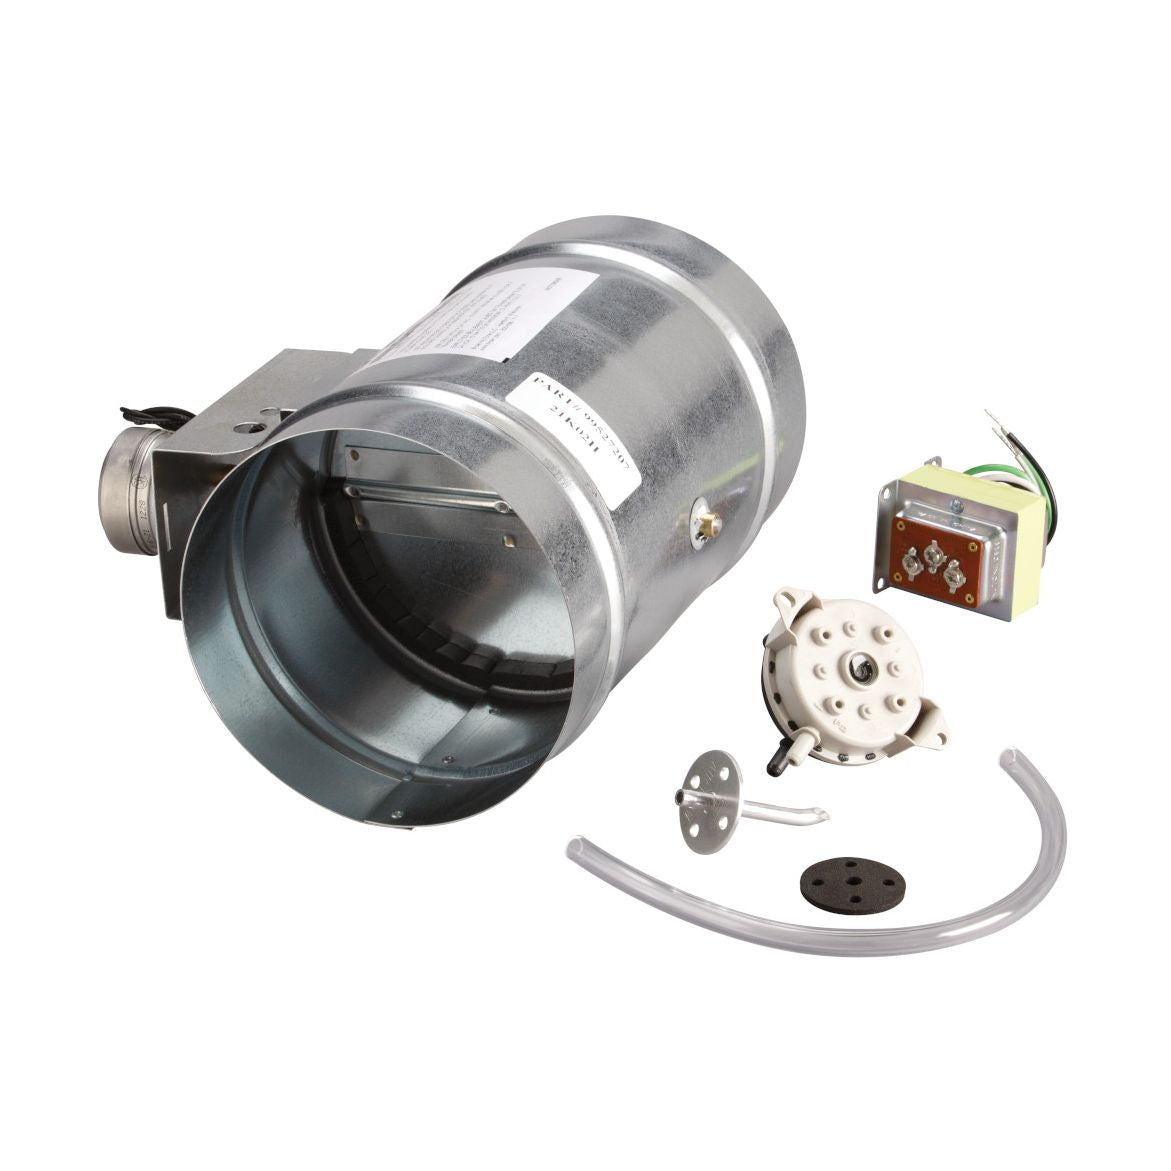 MD10TU - Universal Automatic Make-Up Air Damper with Pressure Sensor Kit - 10" Round Duct